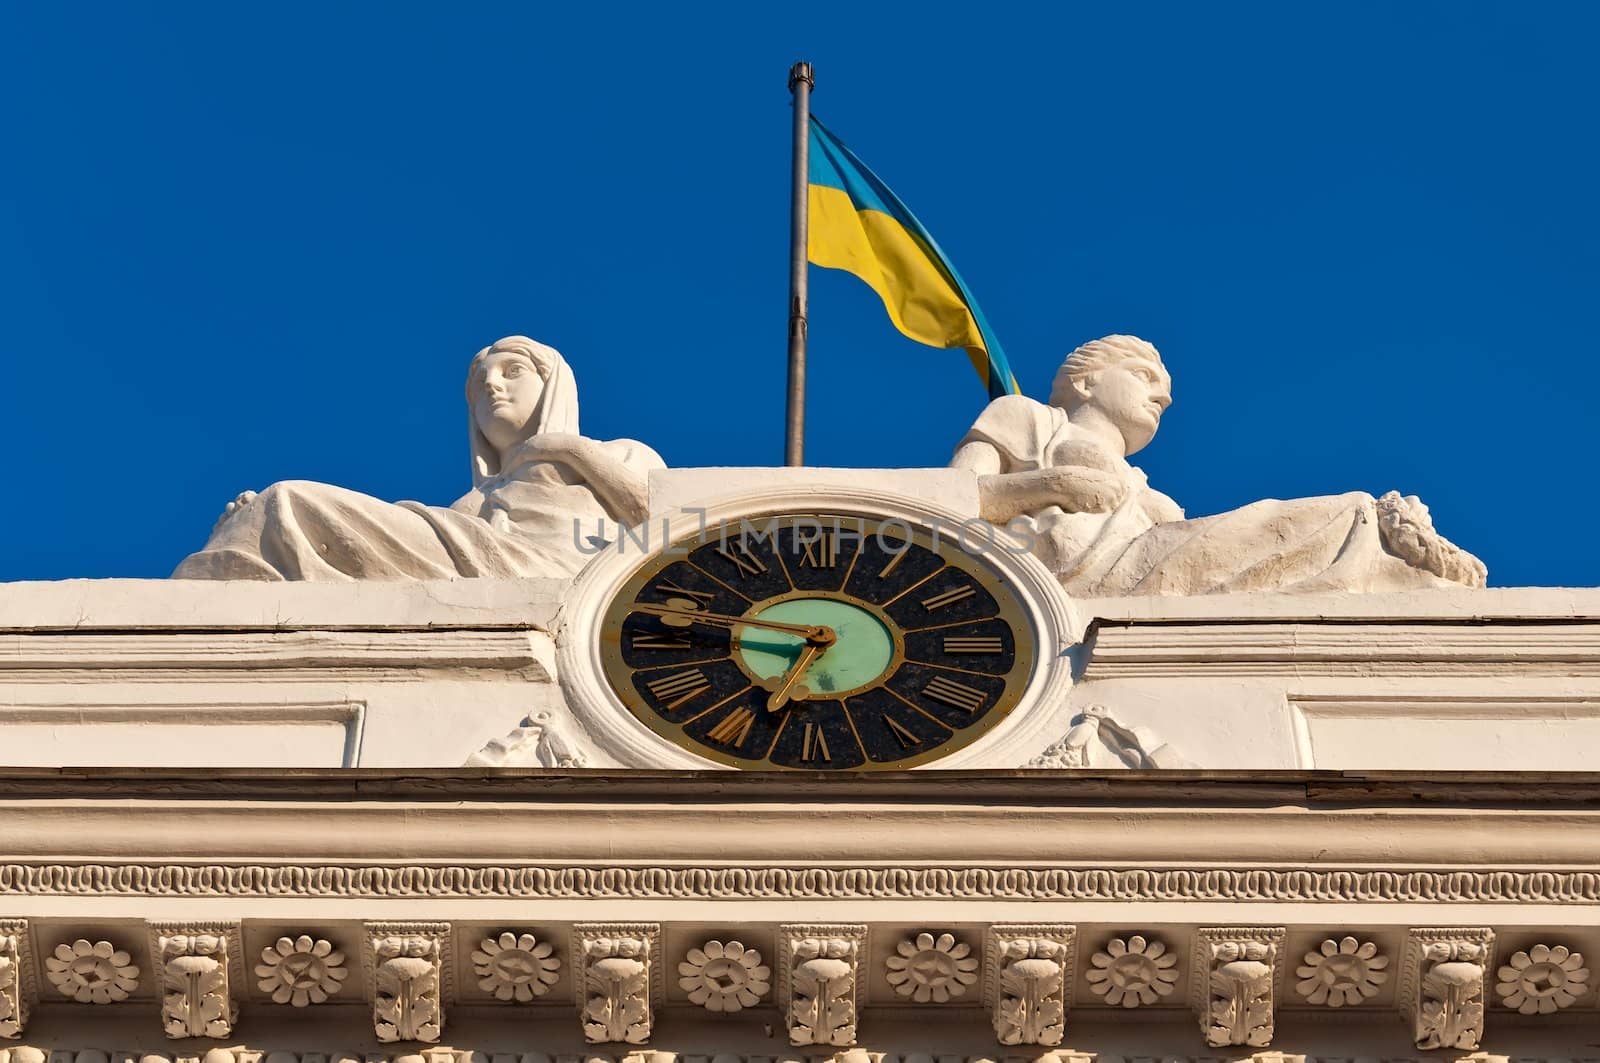 Fragment of a facade of a building of the Odessa city council - chiming clock, sculptural composition and a national flag of Ukraine.